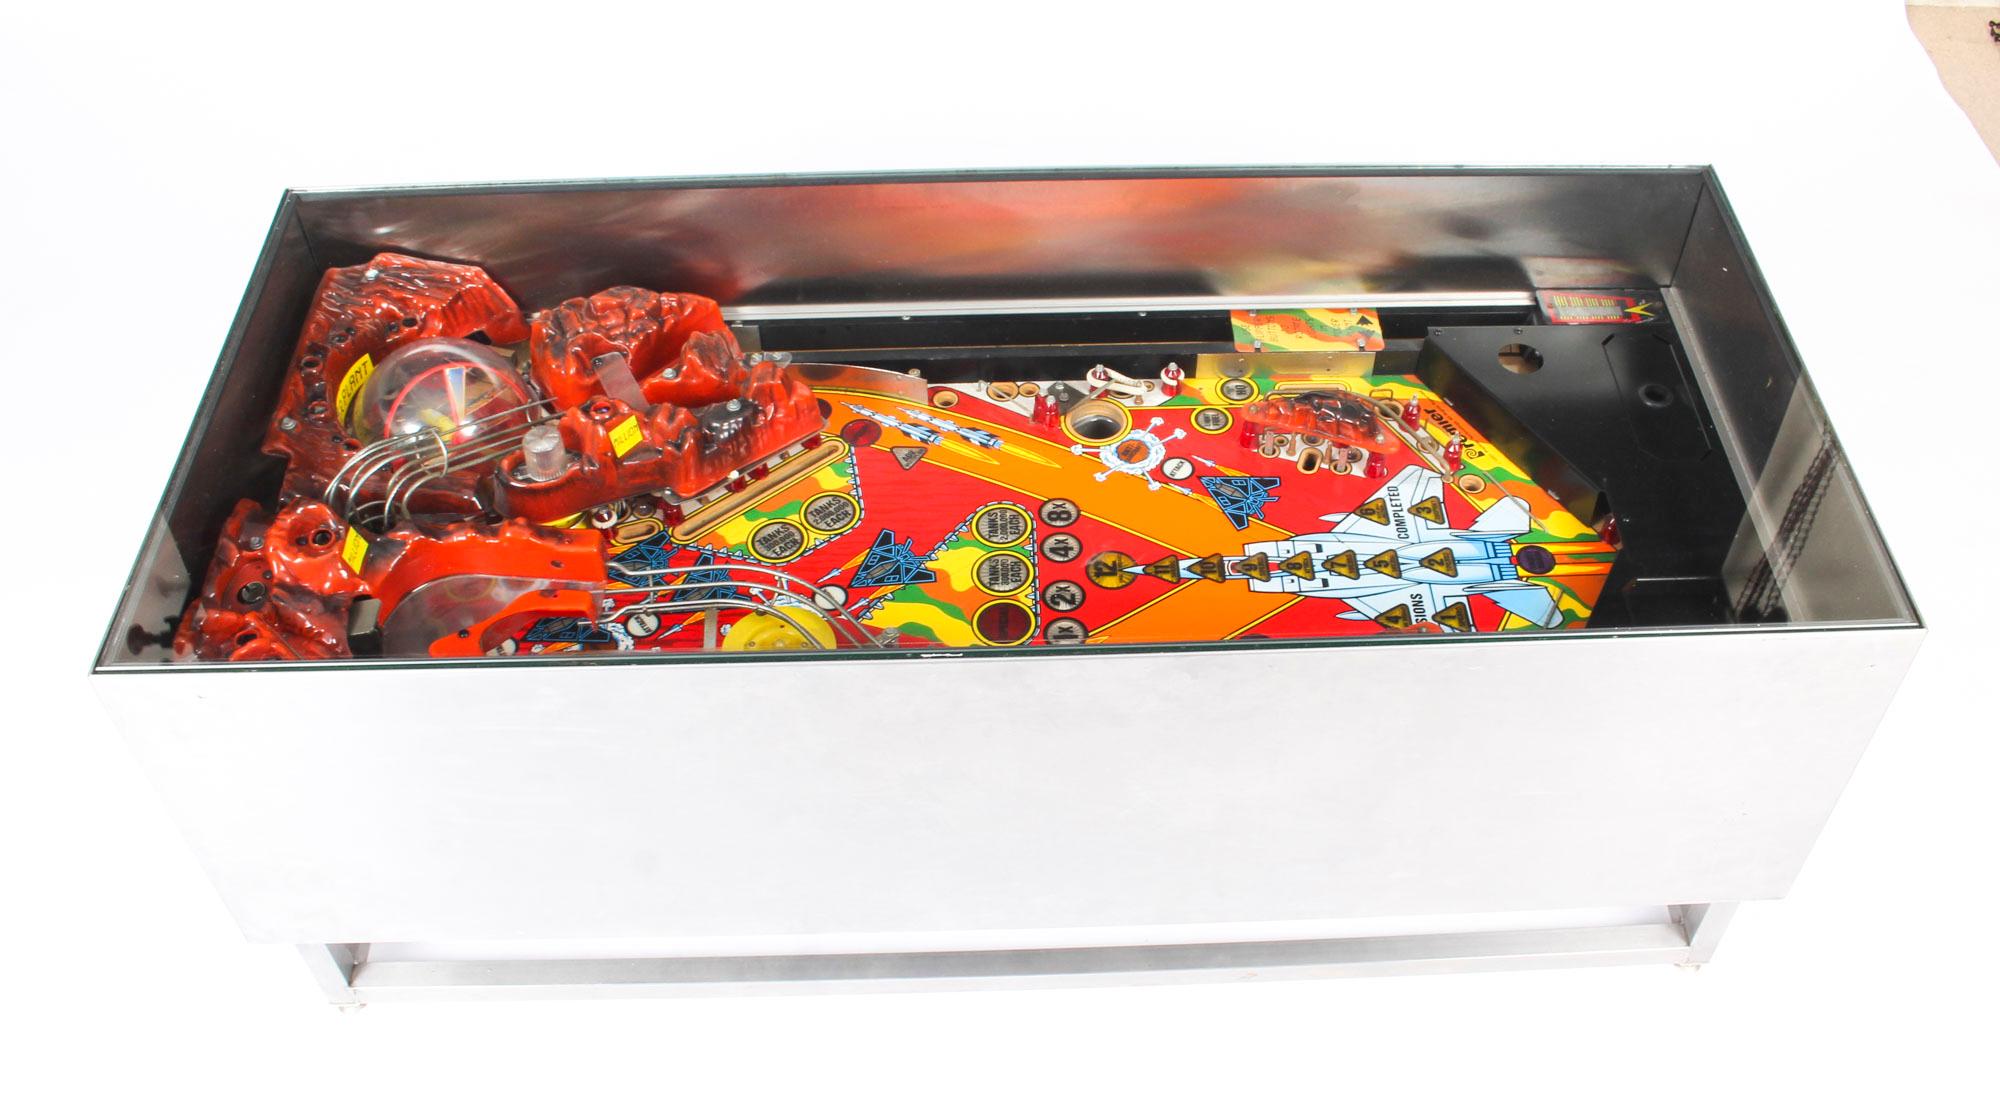 This is an original Gottlieb pinball machine that was cleverly converted into a coffee table, the pinball components are circa 1960 in age.

The colourful coffee table is rectangular in shape and made of stylish brushed steel with a glass top. 
